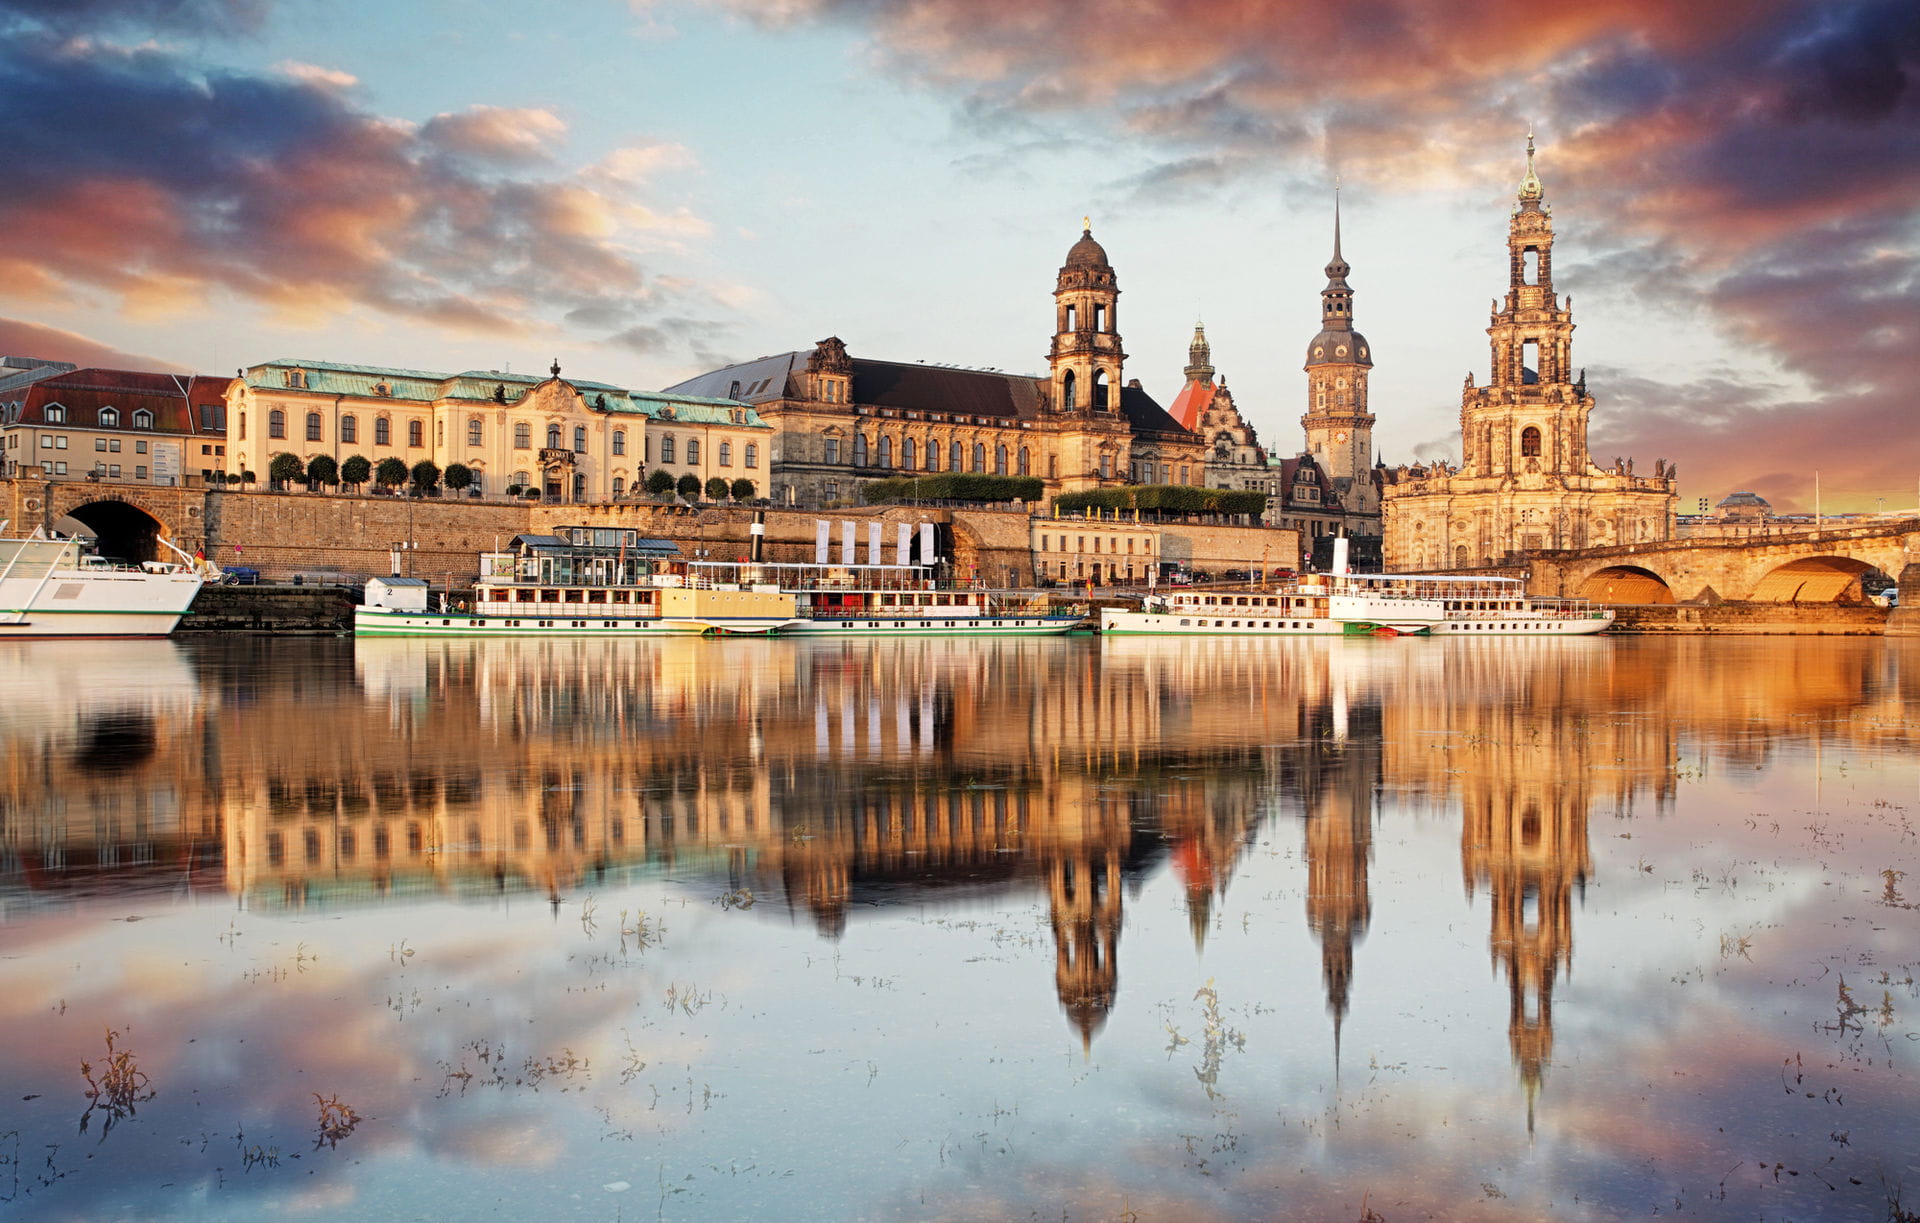 High quality hoto of Dresden - Germany